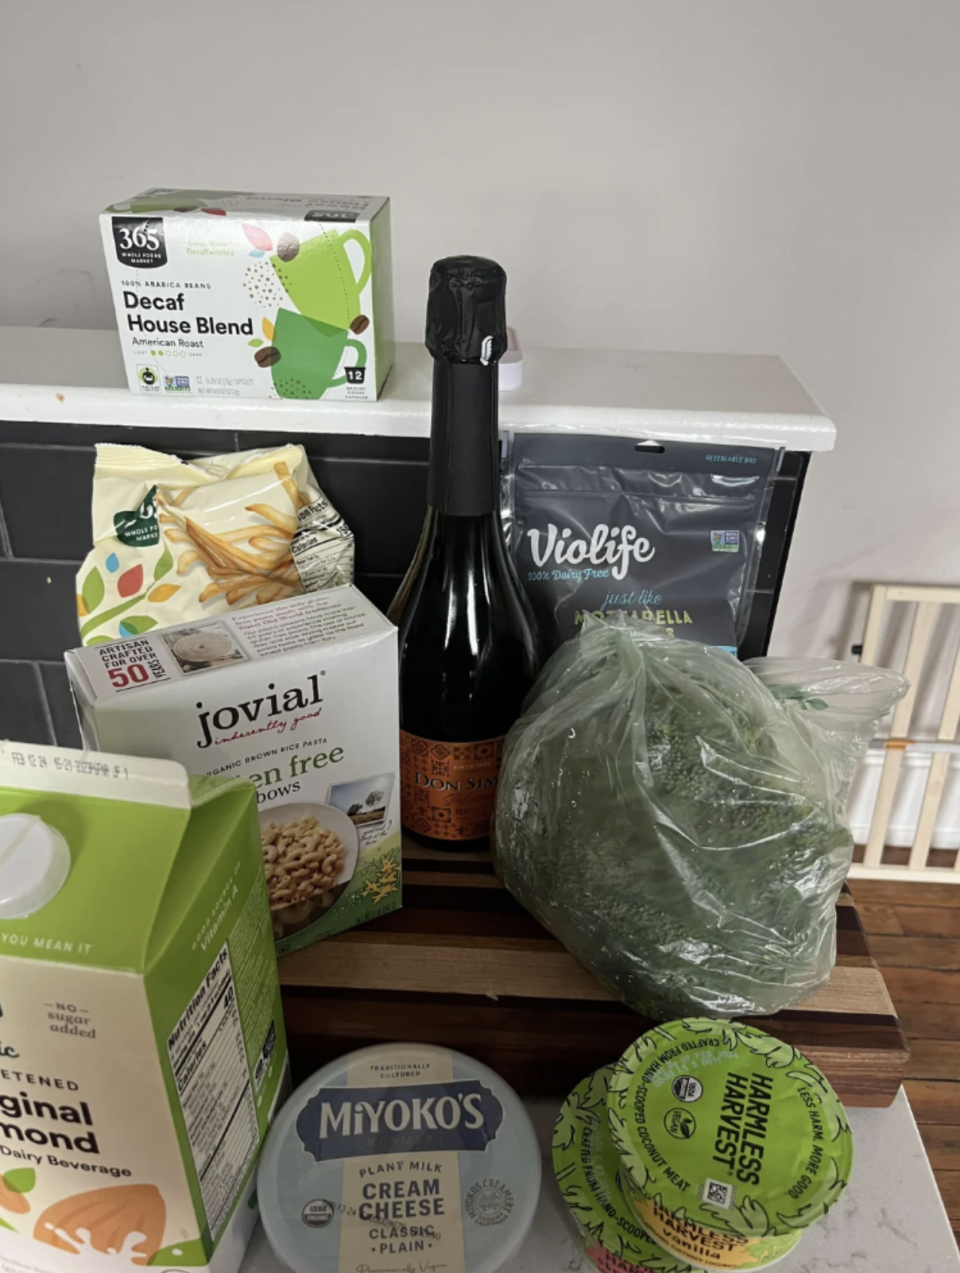 Various grocery items including decaf coffee, pasta, champagne, broccoli, garlic spread, almond milk, cream cheese, and Violife cheese are placed on a kitchen counter